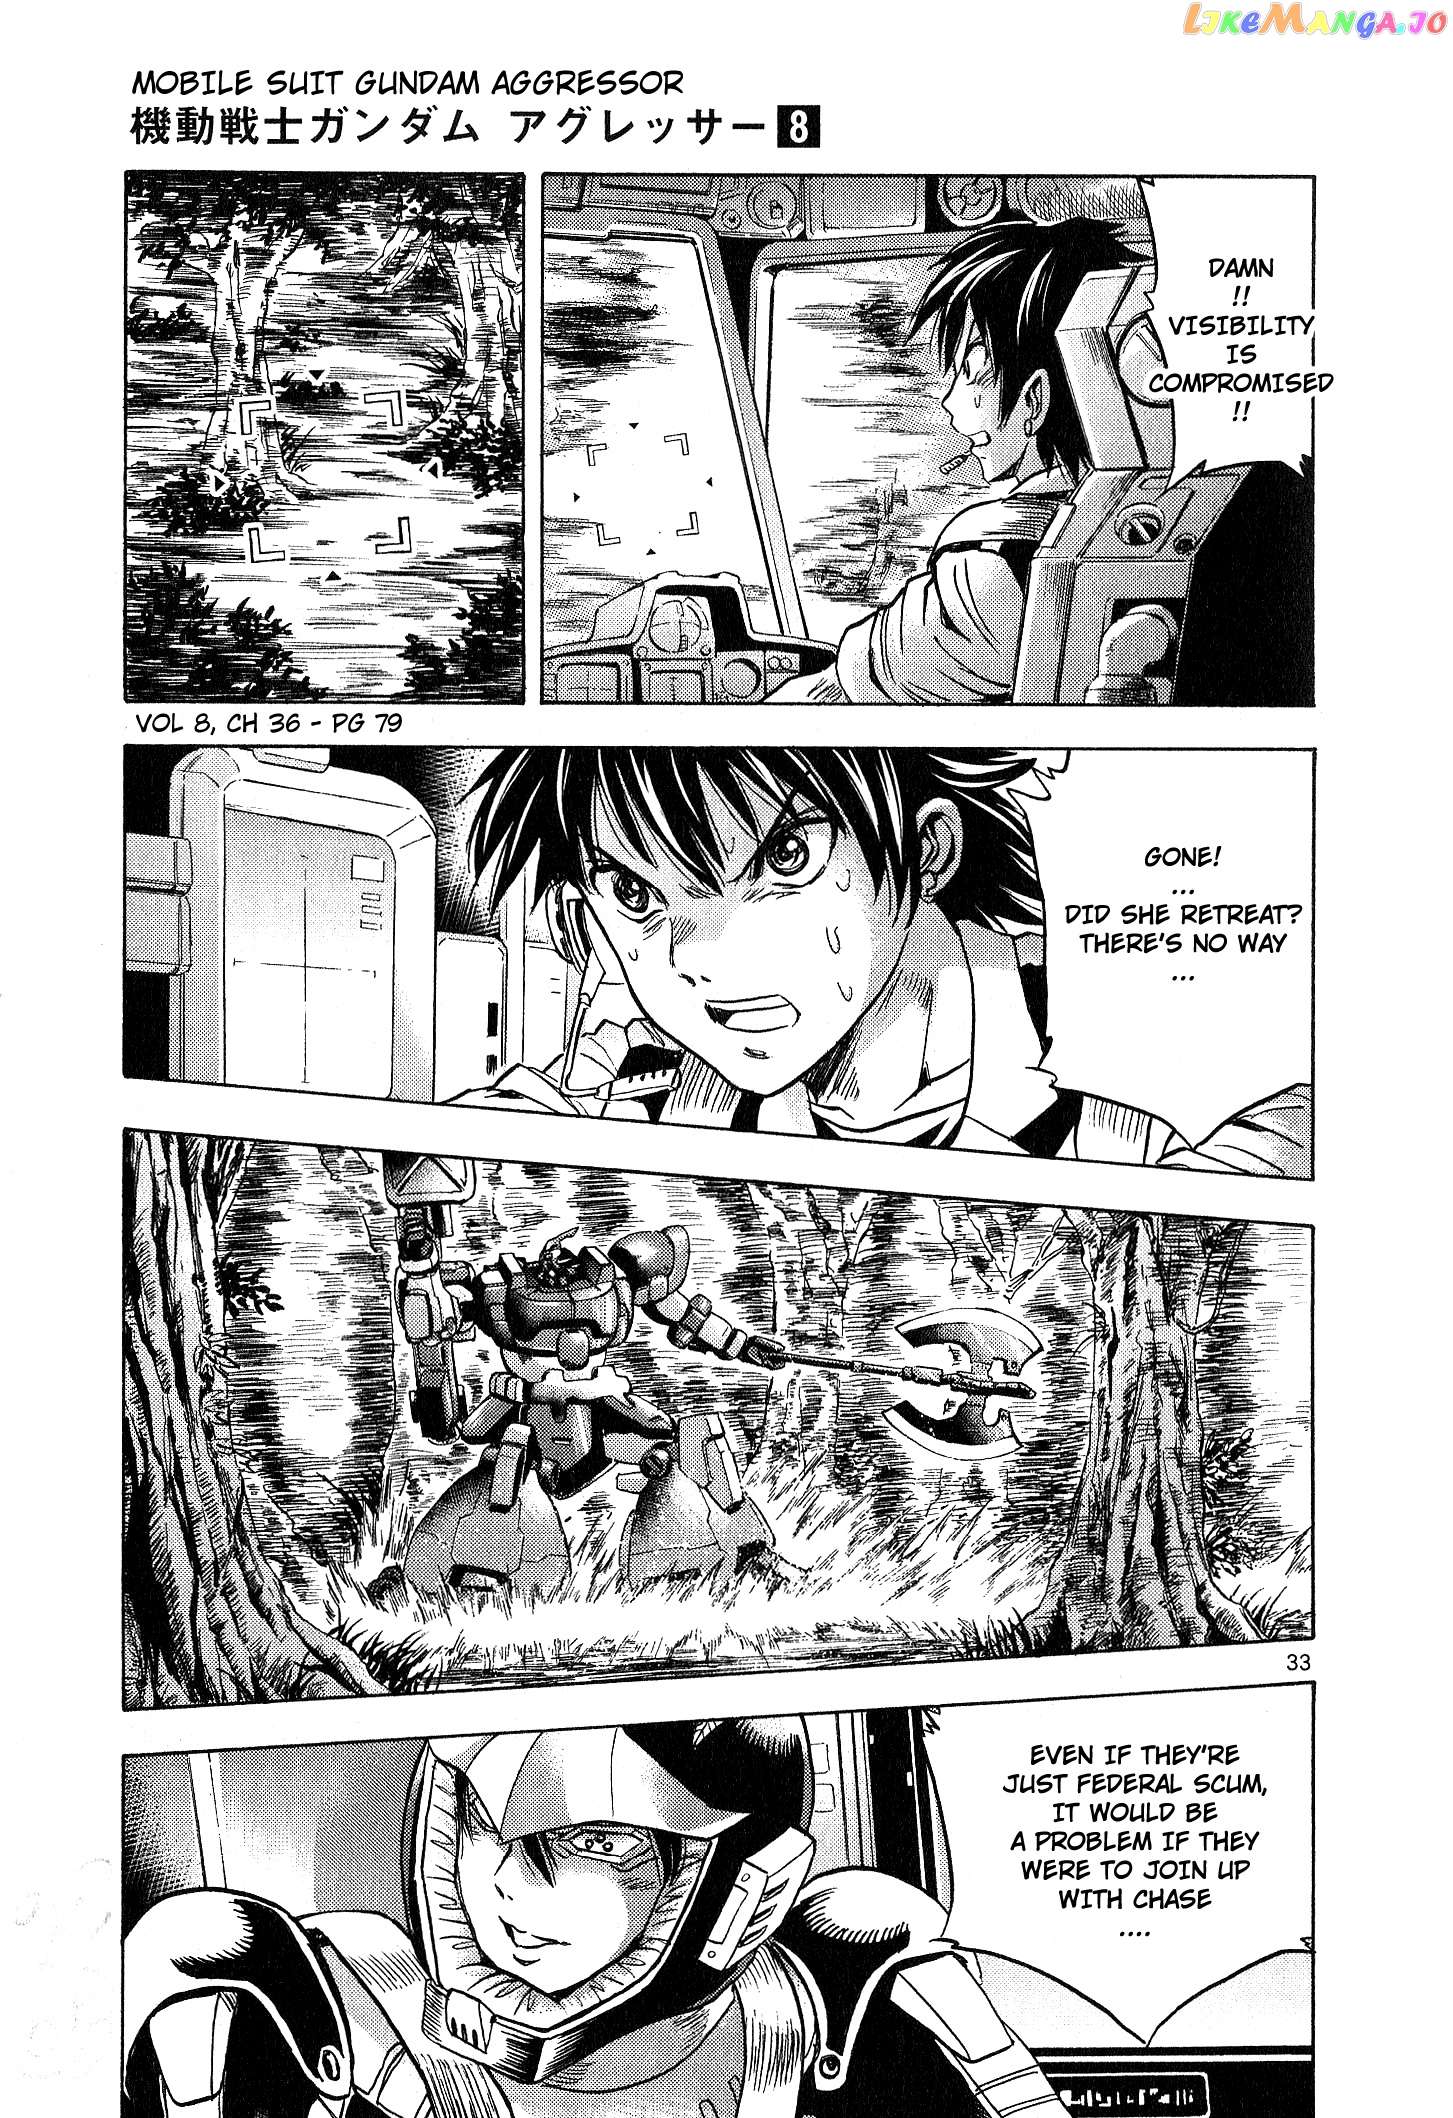 Mobile Suit Gundam Aggressor chapter 36 - page 33